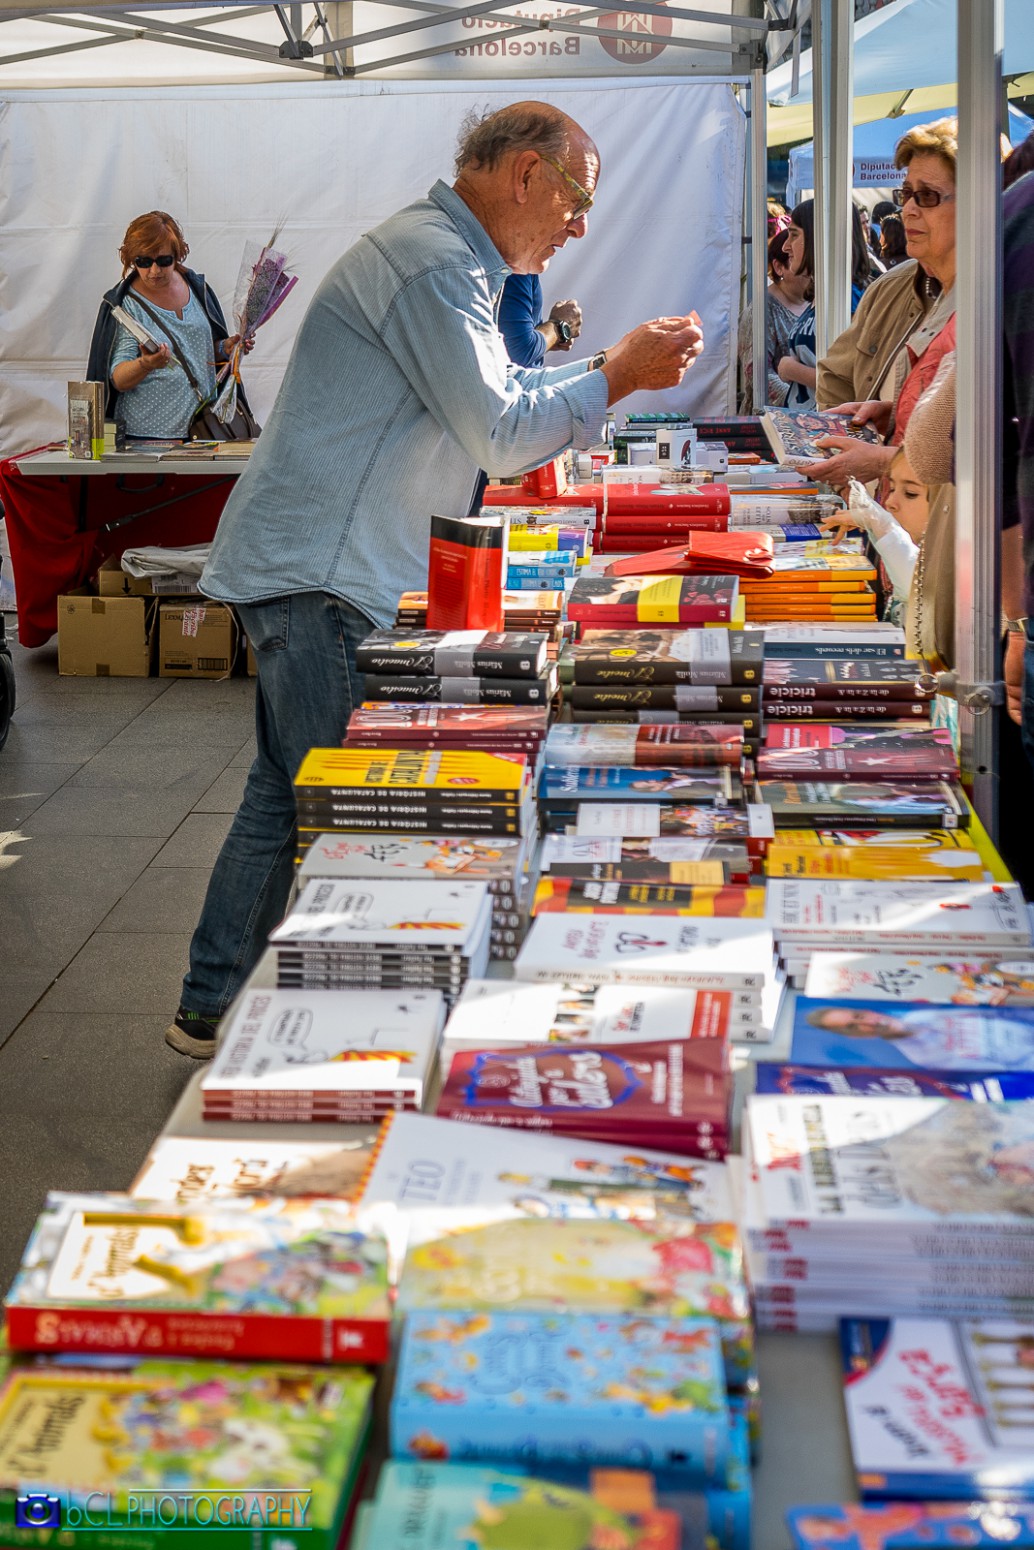 A bookseller advising customers